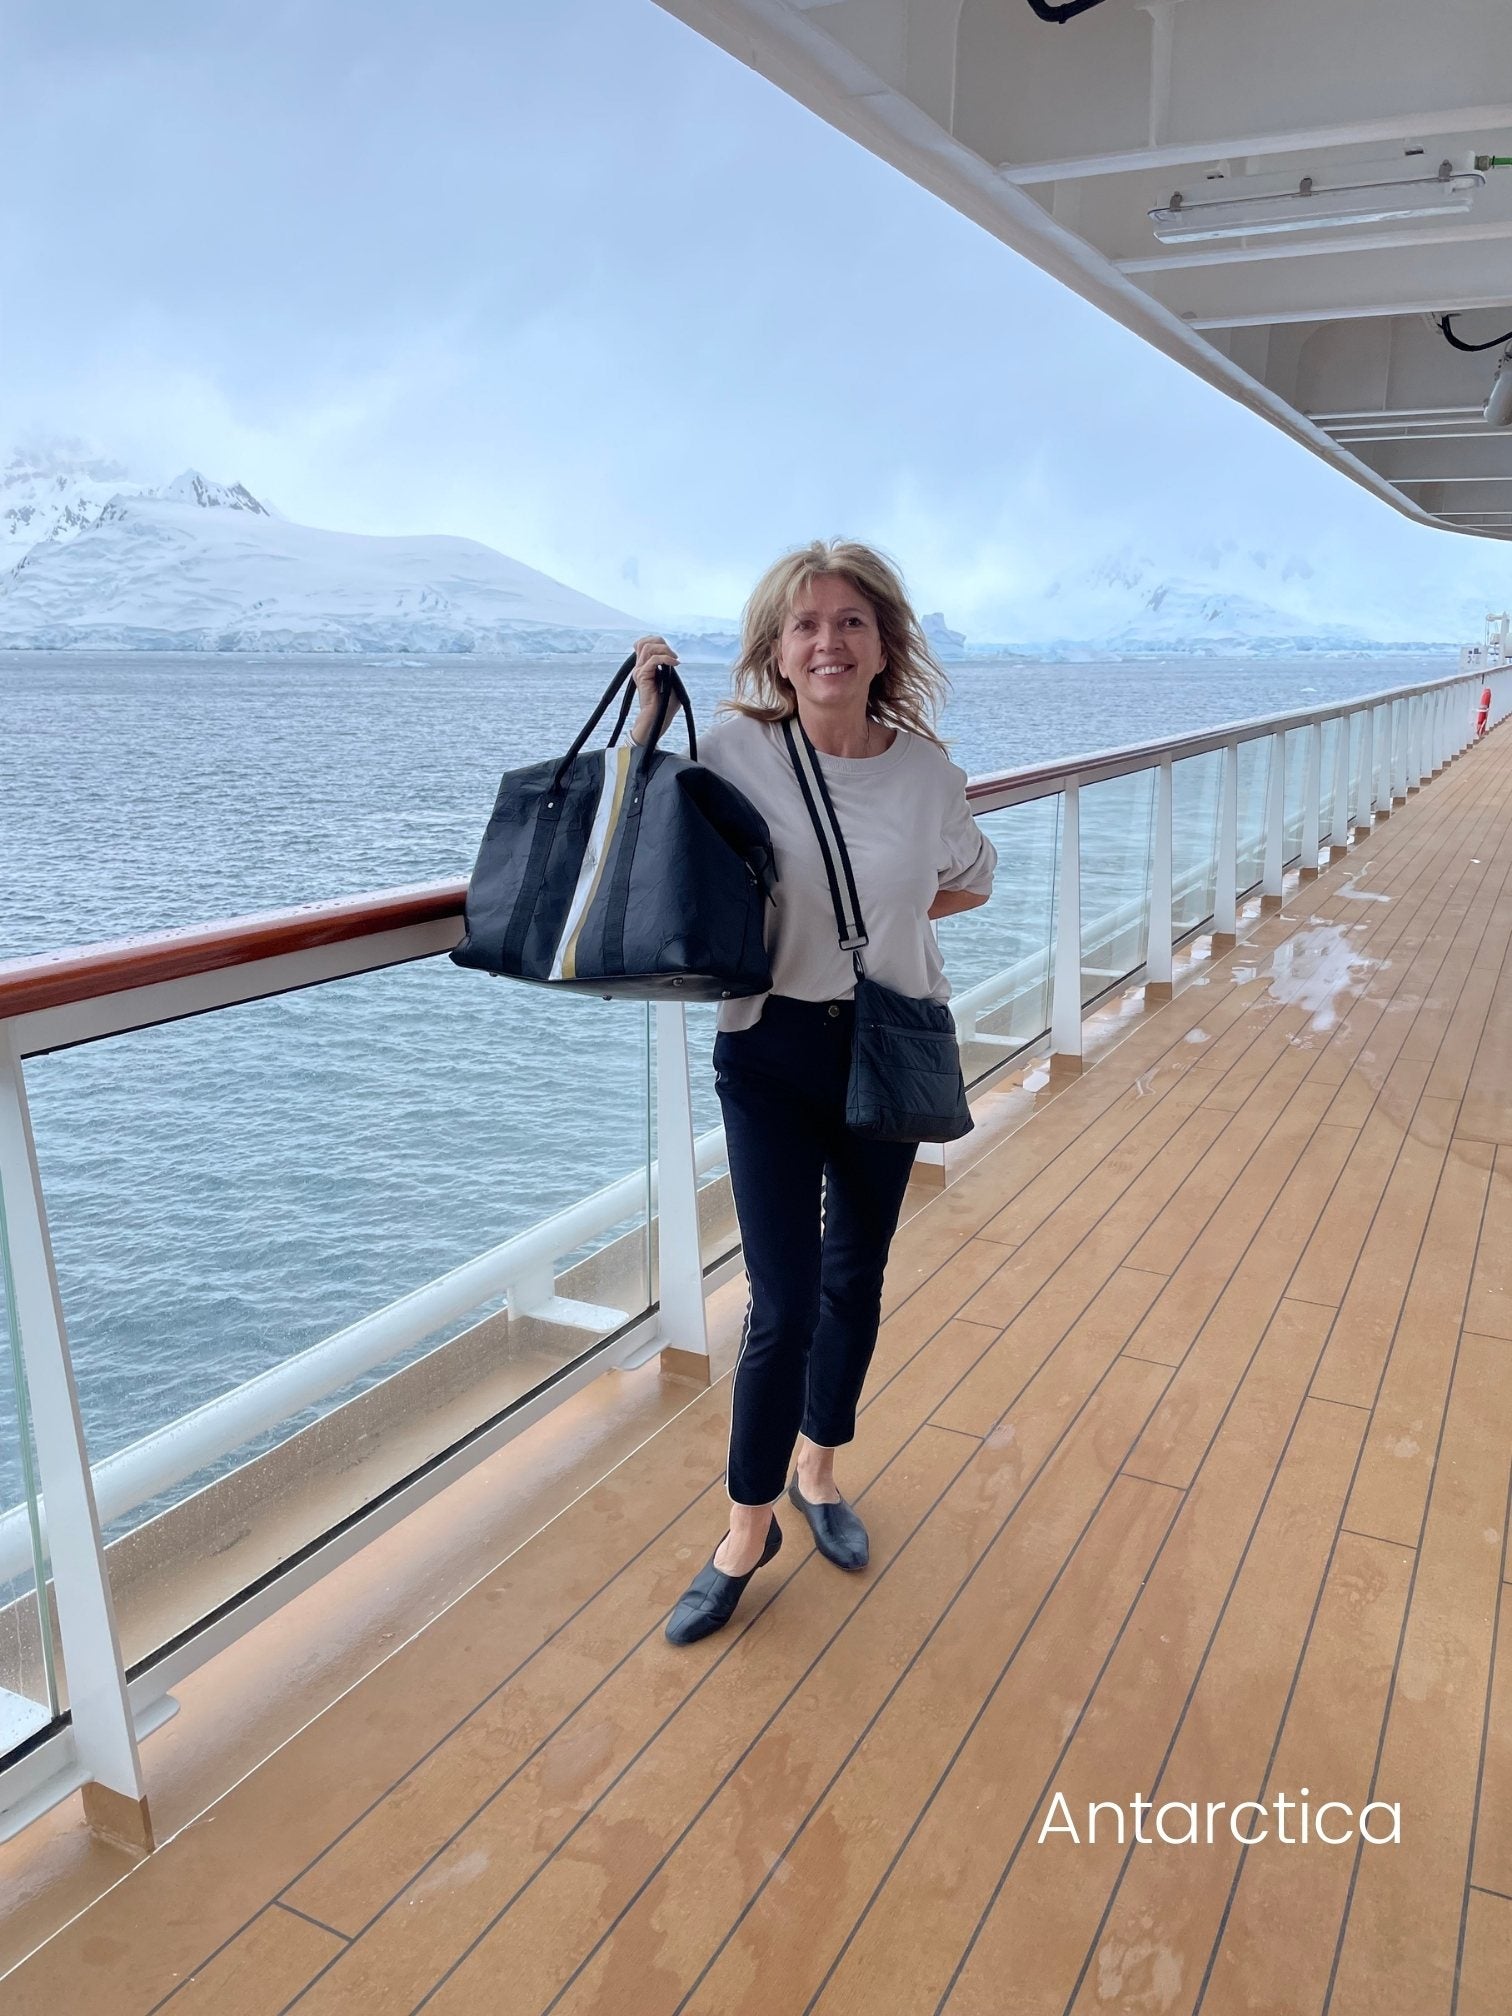 Woman in Antarctica on a cruise ship holding black weekender bag